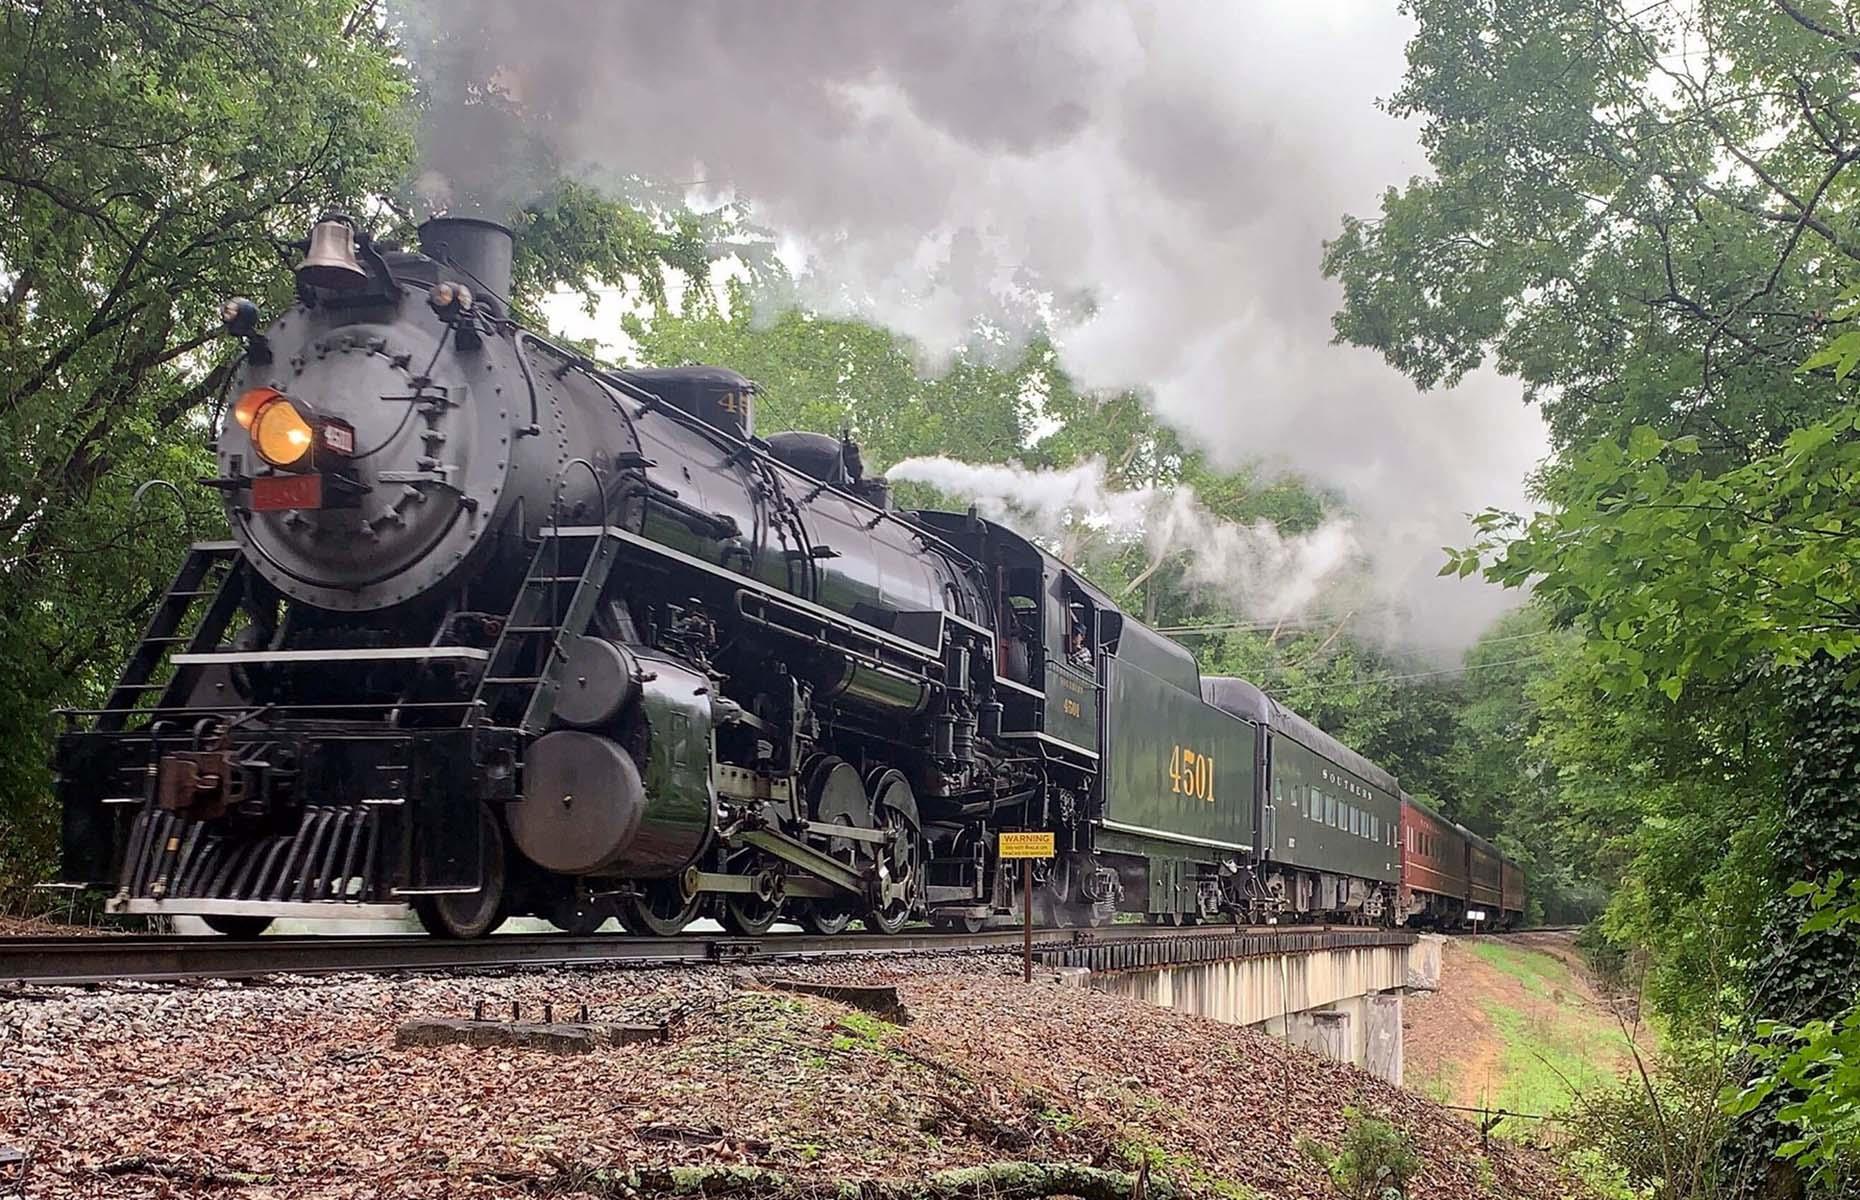 <p>The Tennessee Valley Railroad is a rolling museum of vintage trains, offering a variety of trips that show what traveling was like during the Golden Age of Rail. Excursions include a 50-mile (80.5km) half-day round trip to the Hiwassee Loop from Etowah, as well as <a href="https://www.tvrail.com/events-exhibits/rides/chickamauga-turn">a six-hour tour</a> of the historic Civil War town Chickamauga, Georgia, via the former Central of Georgia Railroad.</p>